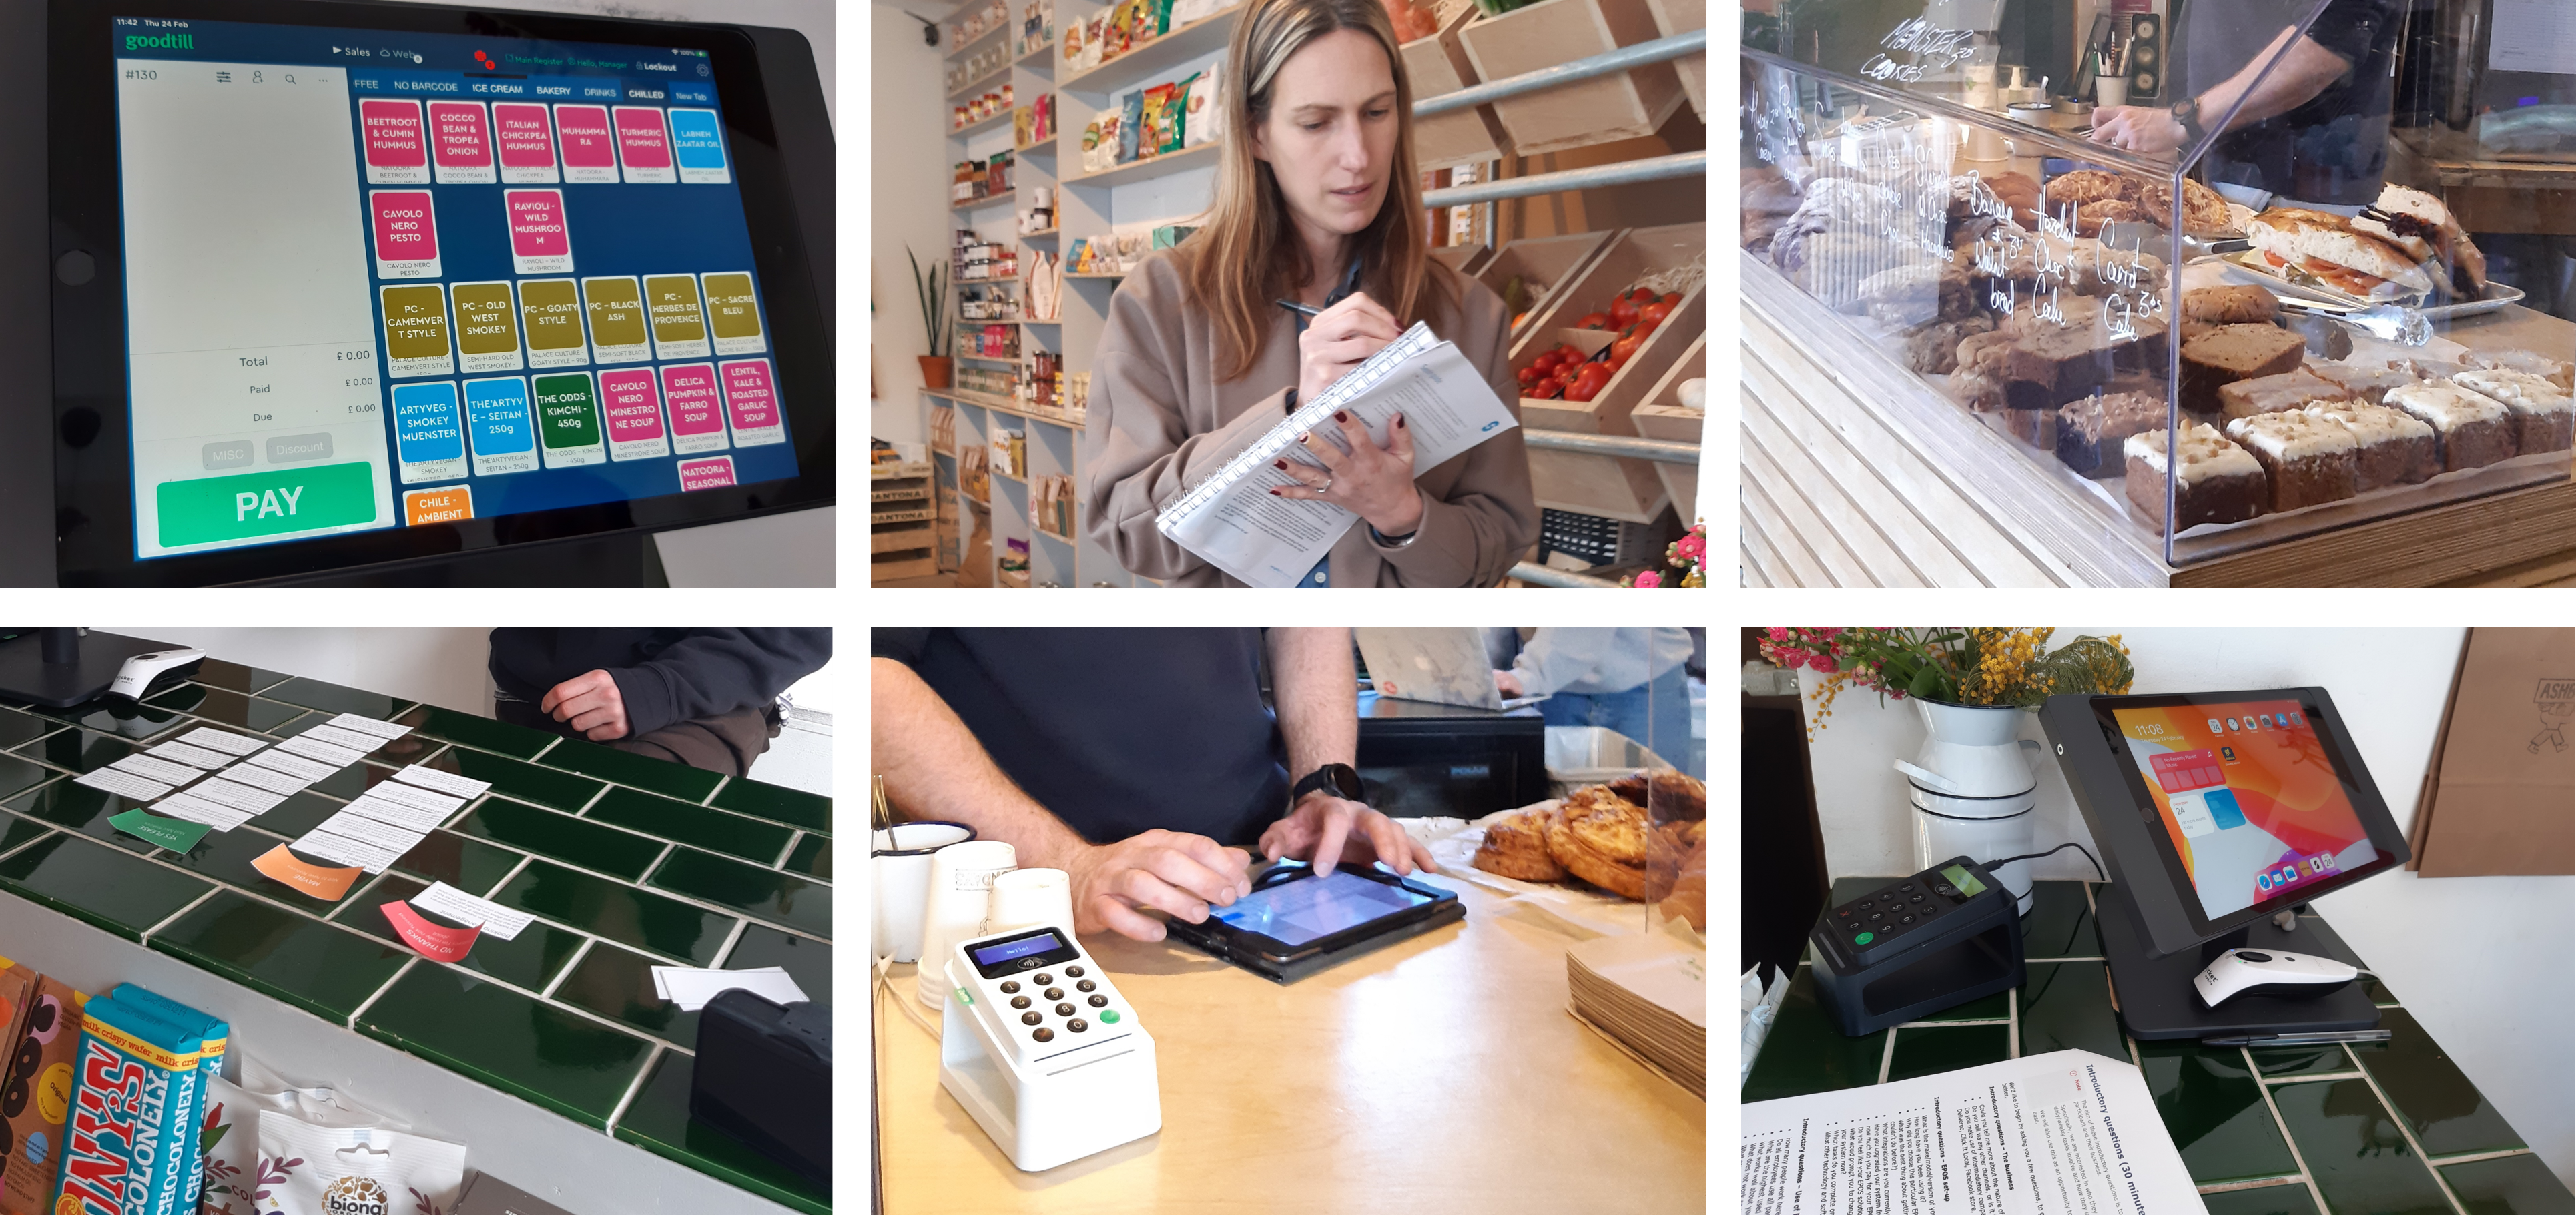 Photos of consultants carrying out research on payment systems